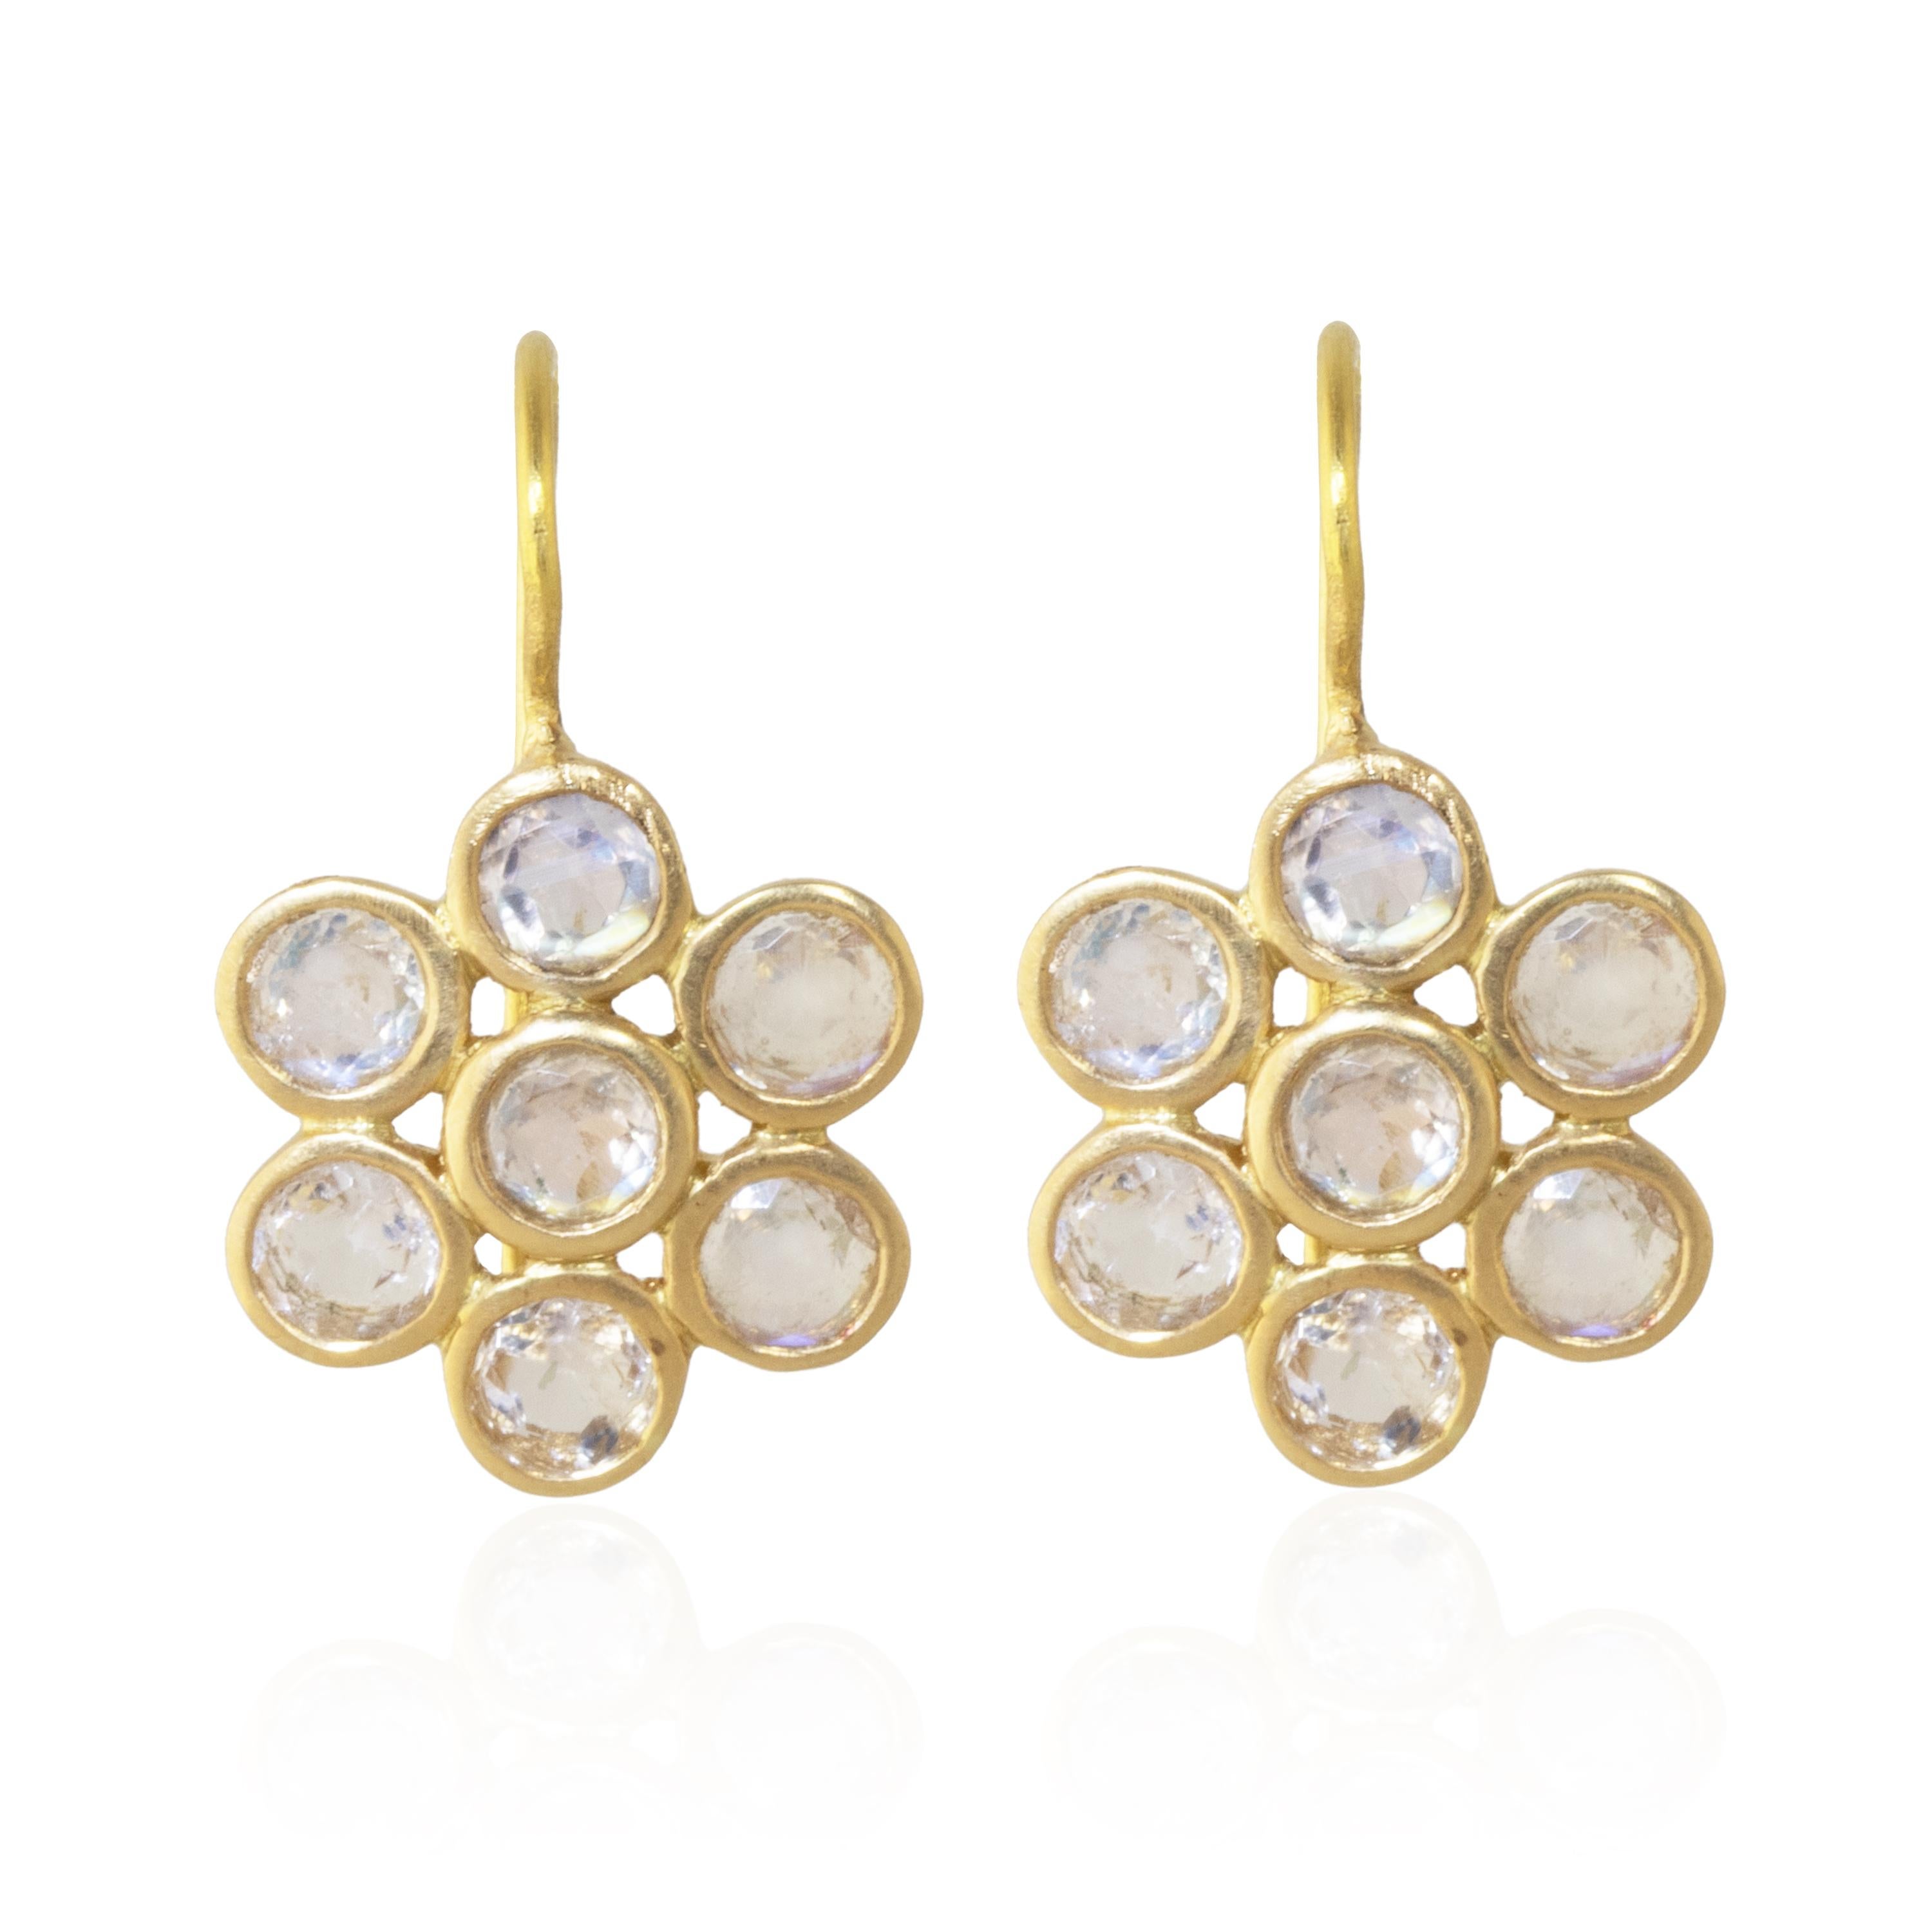 Mesmerizing with its 'glowing-from-within' shade of blue, these delicate drop earrings feature 2.48 carats of round, faceted Rainbow Moonstones set in 22k matte yellow gold.  These drops feature 14 faceted Rainbow Moonstones set in a floral design.